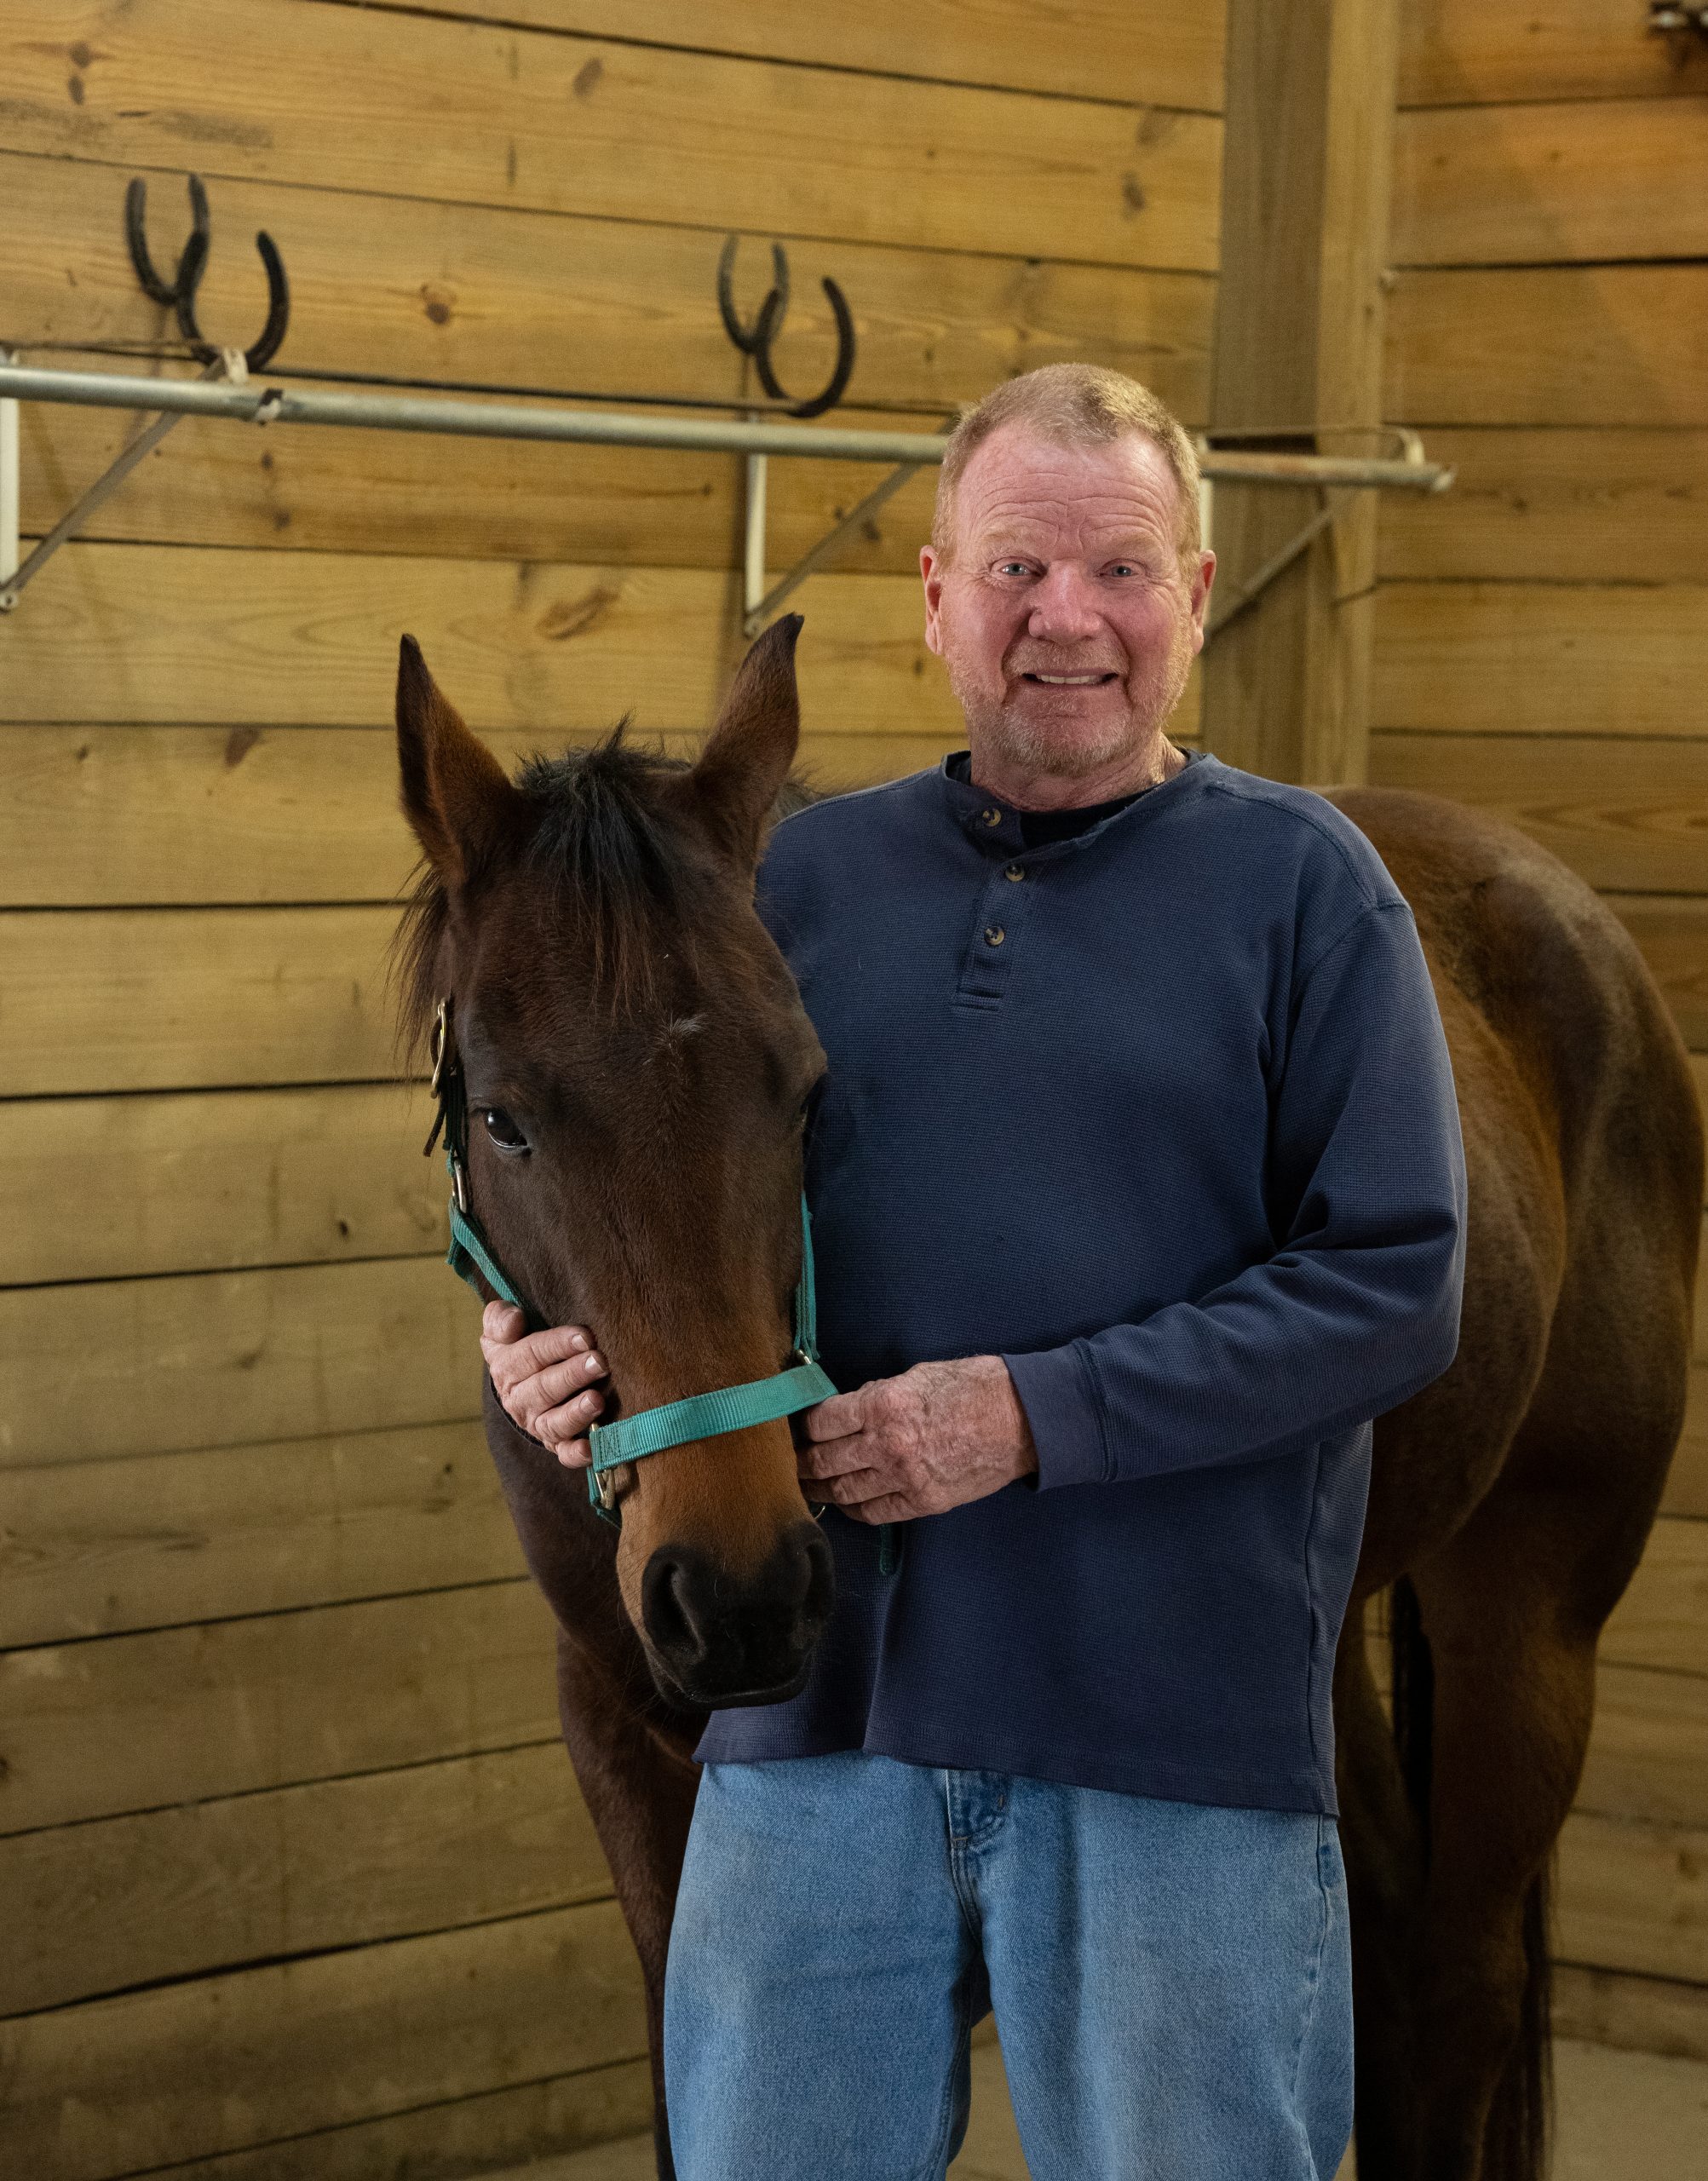 Camden native Mike Scott performs saddle fitting services and runs an equine massage school. Dressage horses are elite athletes that deserve extra special care. Mike says horses, like people, tend to have common sore areas related to the activity they are doing. Photography courtesy of Randy Hudson